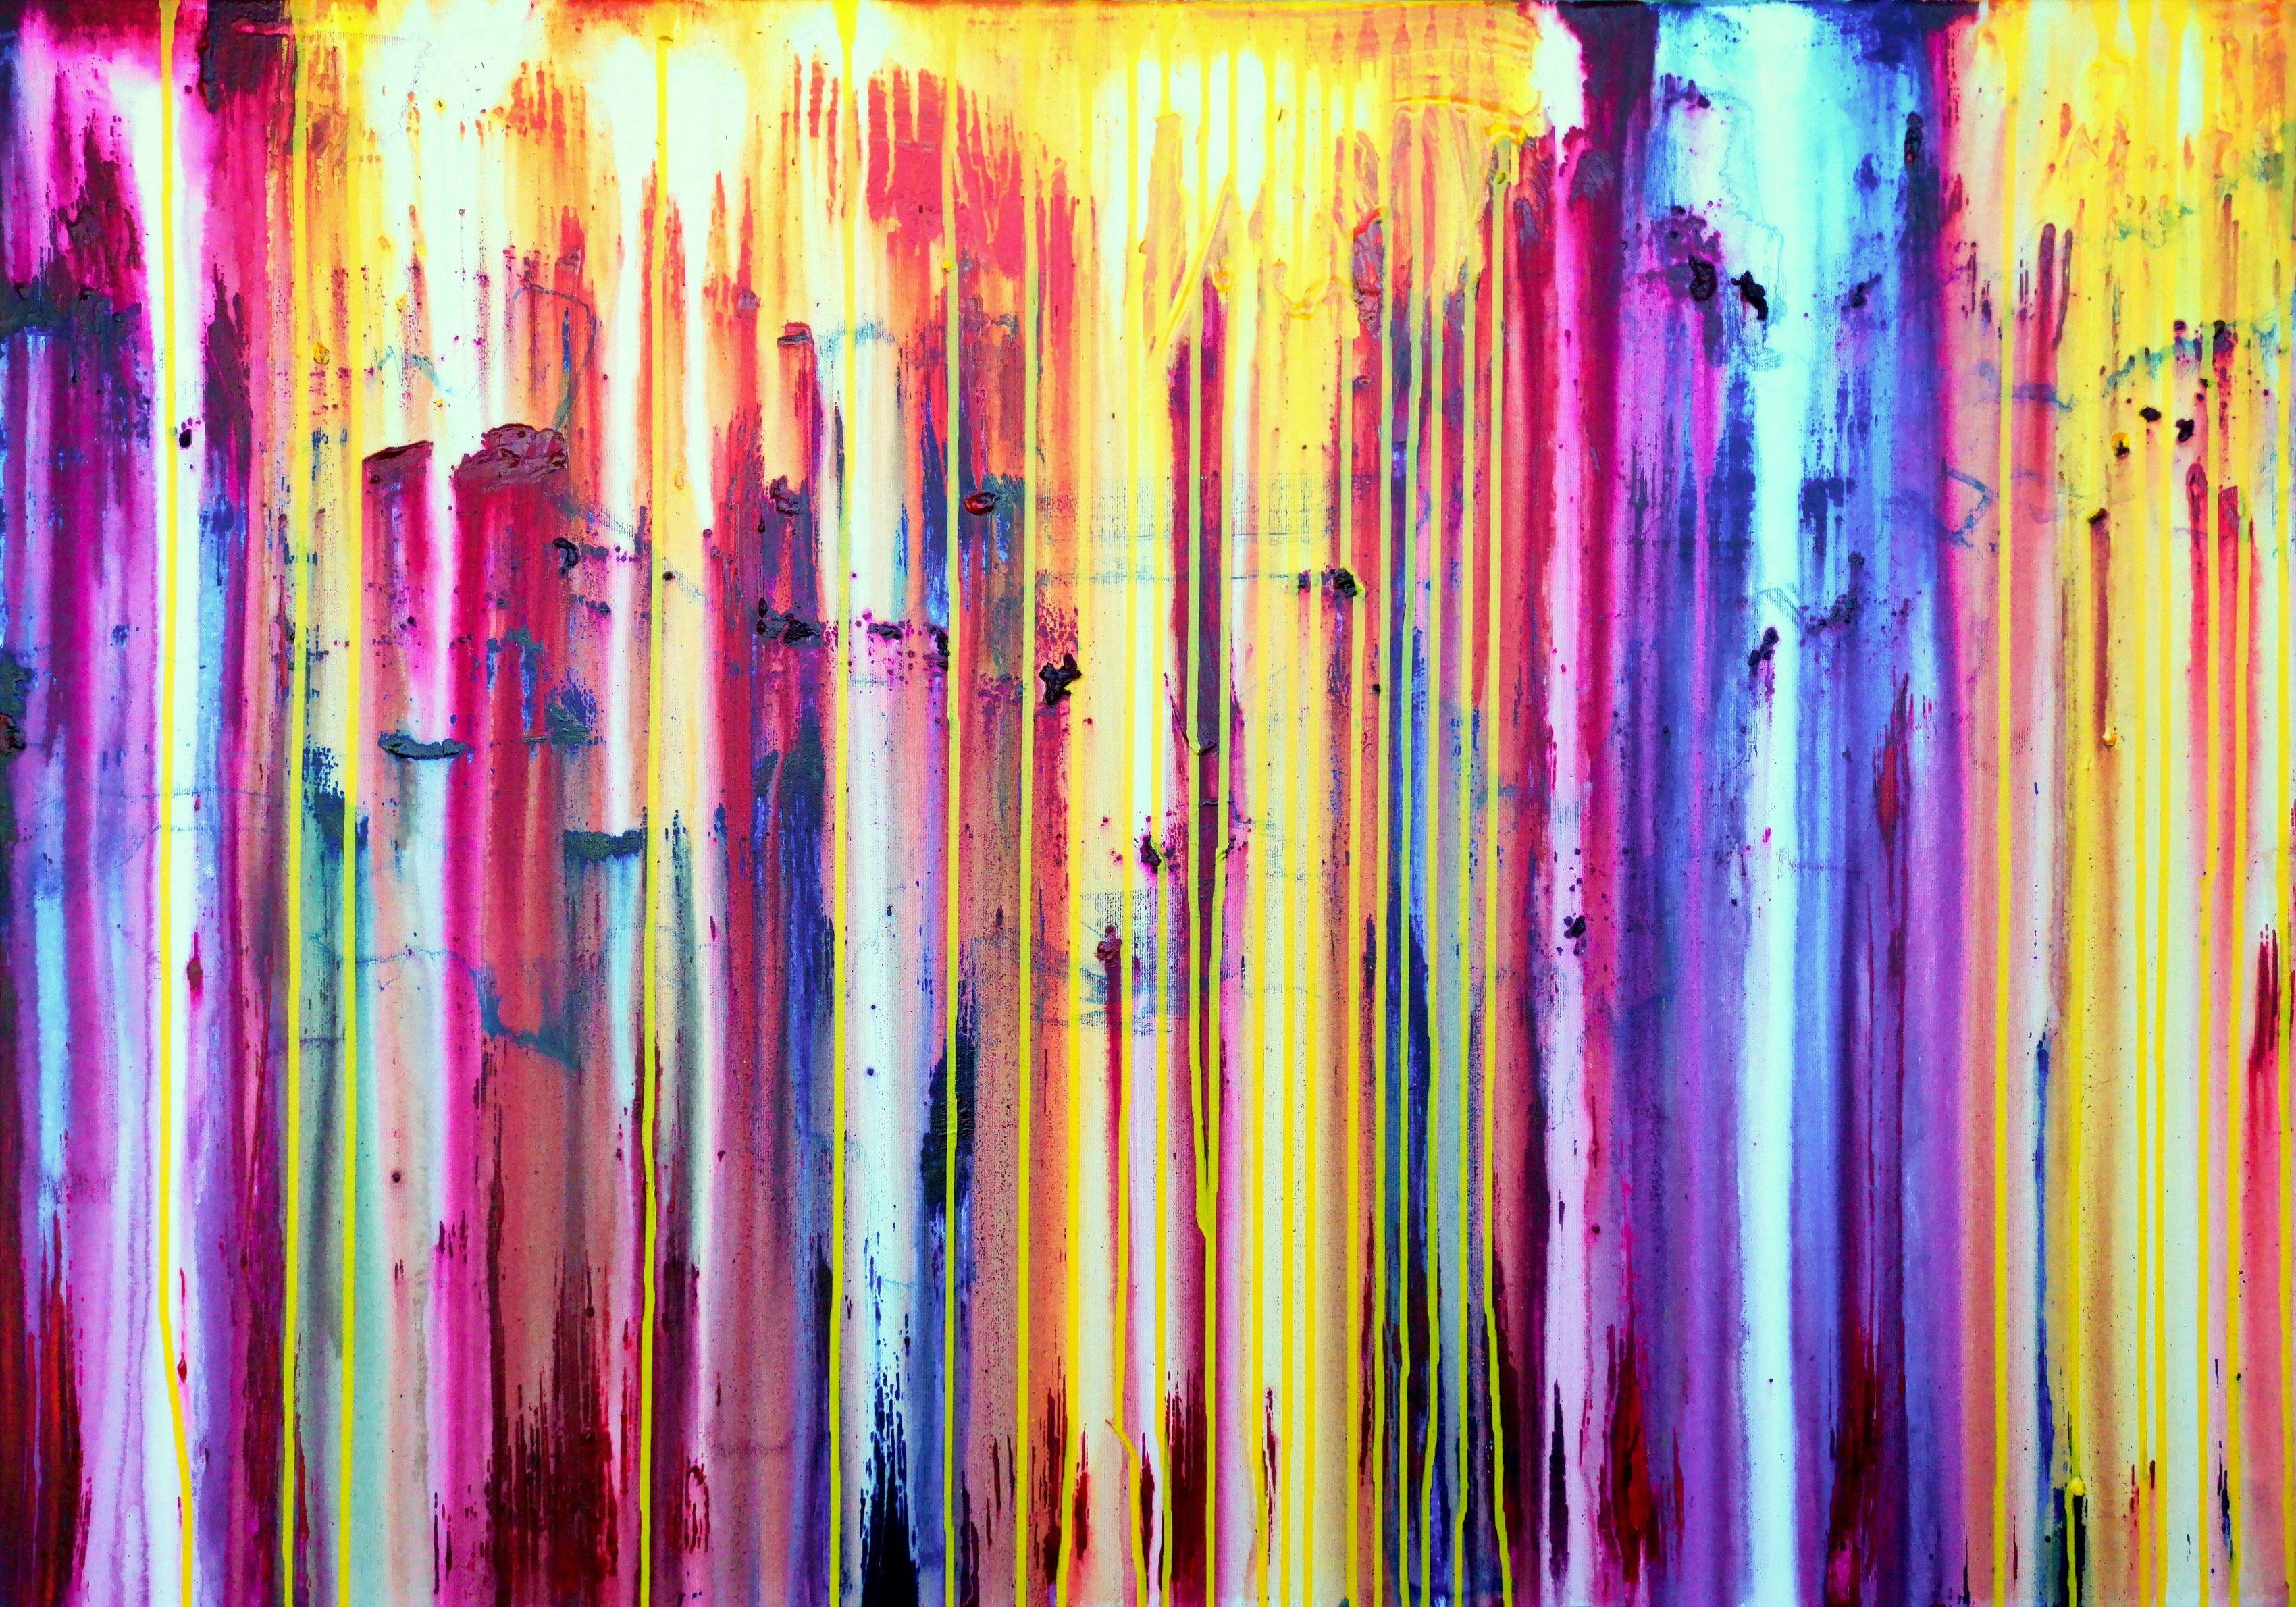 Carla Sá Fernandes Abstract Painting - The Emotional Creation #273, Painting, Acrylic on Canvas